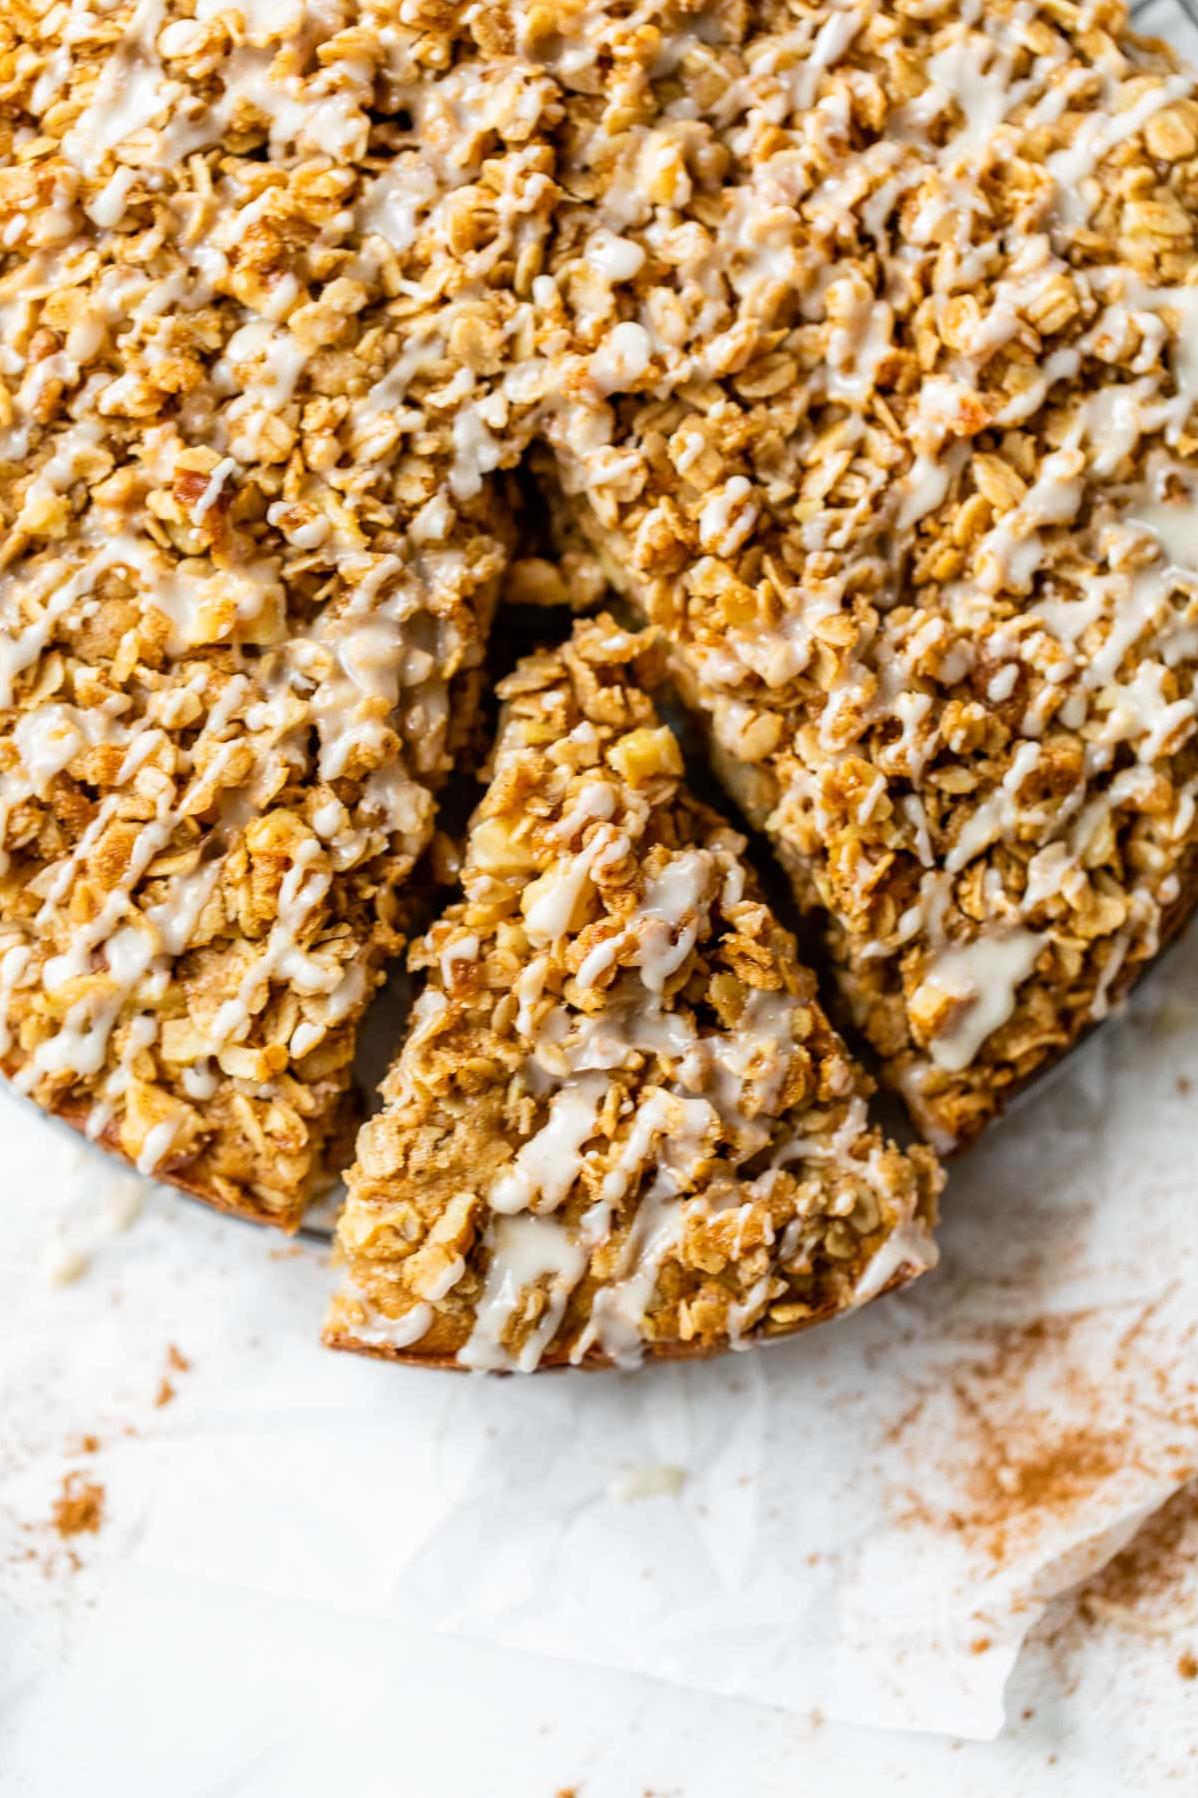  Satisfy your sweet tooth cravings with this scrumptious Apple-Oat Coffee Cake!